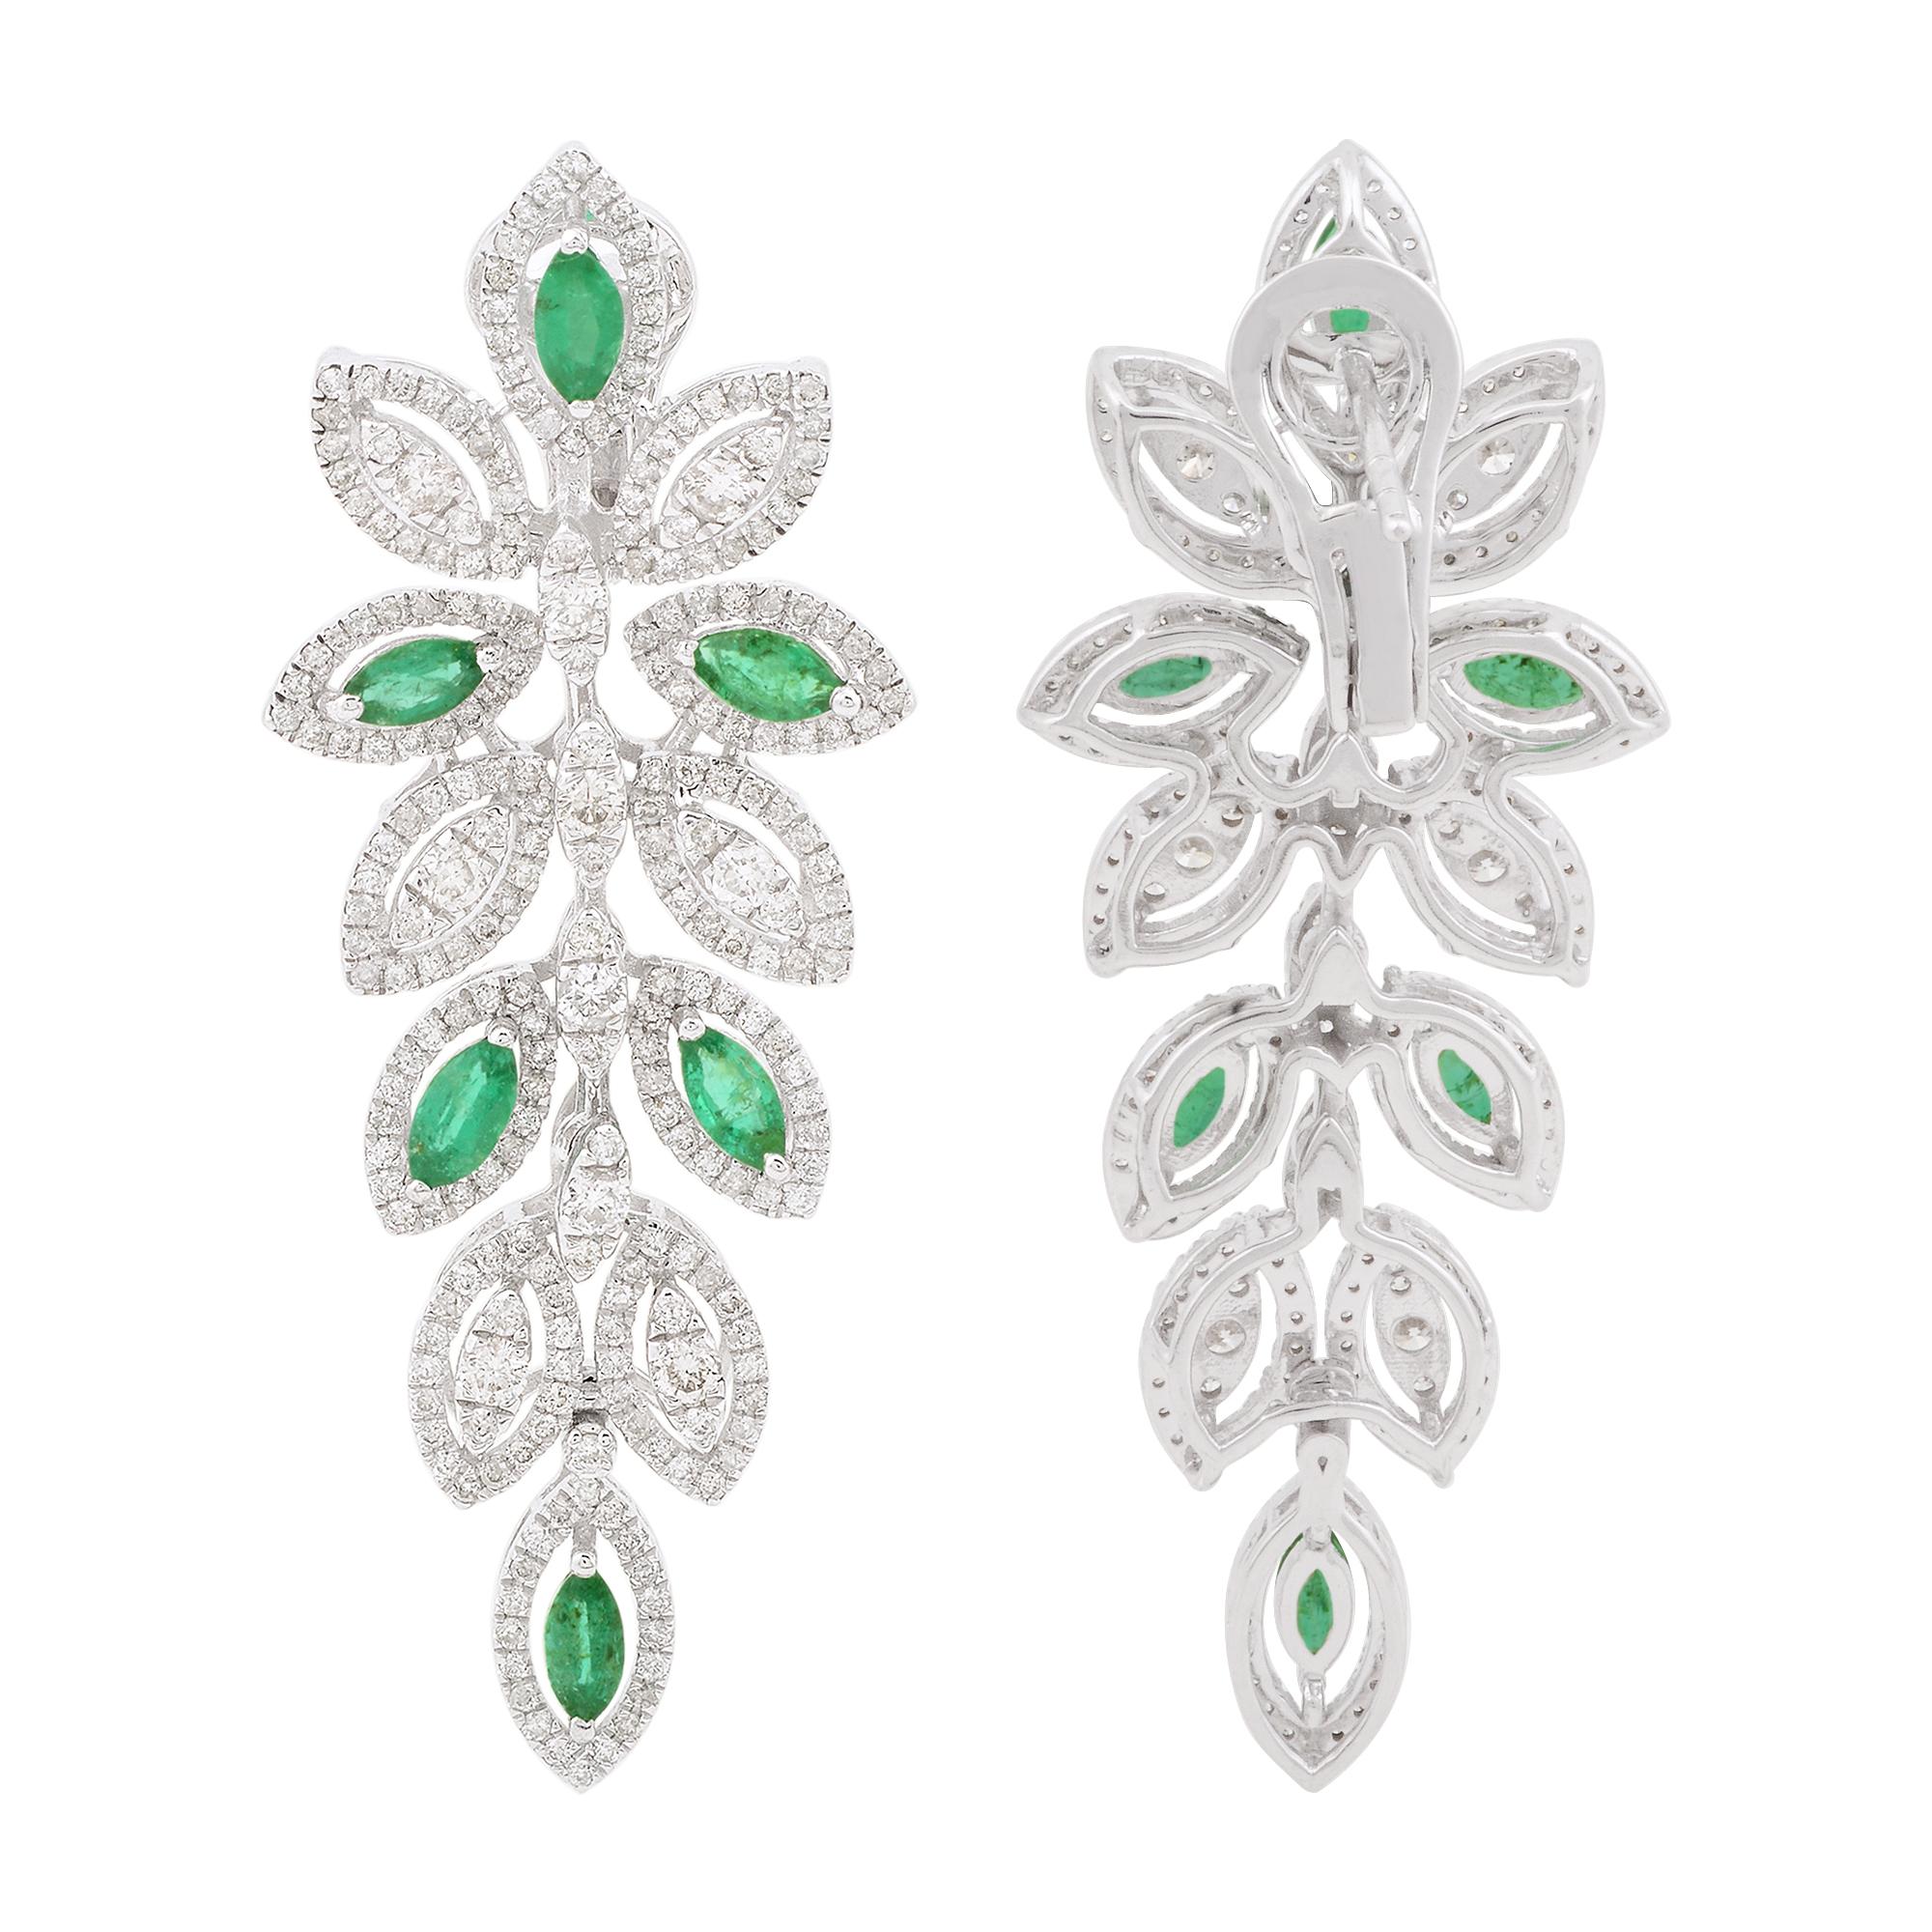 Item Code :- SFE-1067
Gross Wet. :- 15.56 gm
18k White Gold Wet :- 15.06 gm
Diamond Wet :- 1.13 Ct. ( AVERAGE DIAMOND CLARITY SI1-SI2 & COLOR H-I )
Emerald Wet :- 1.37 Ct.
Earrings Size :- 50 mm approx.

✦ Sizing
.....................
We can adjust